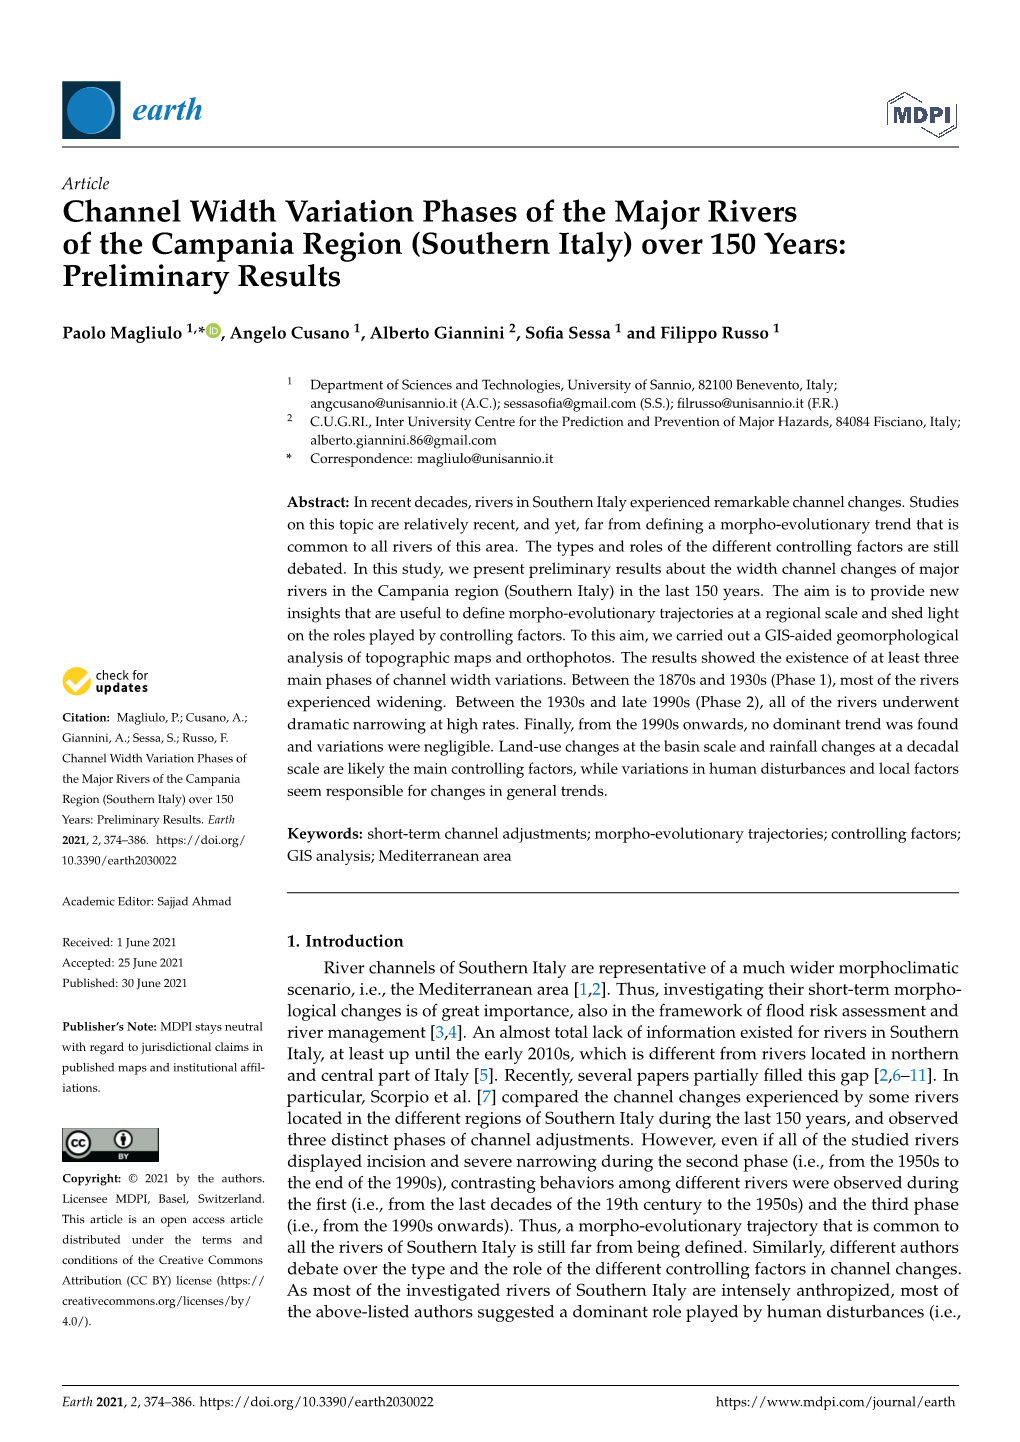 Southern Italy) Over 150 Years: Preliminary Results